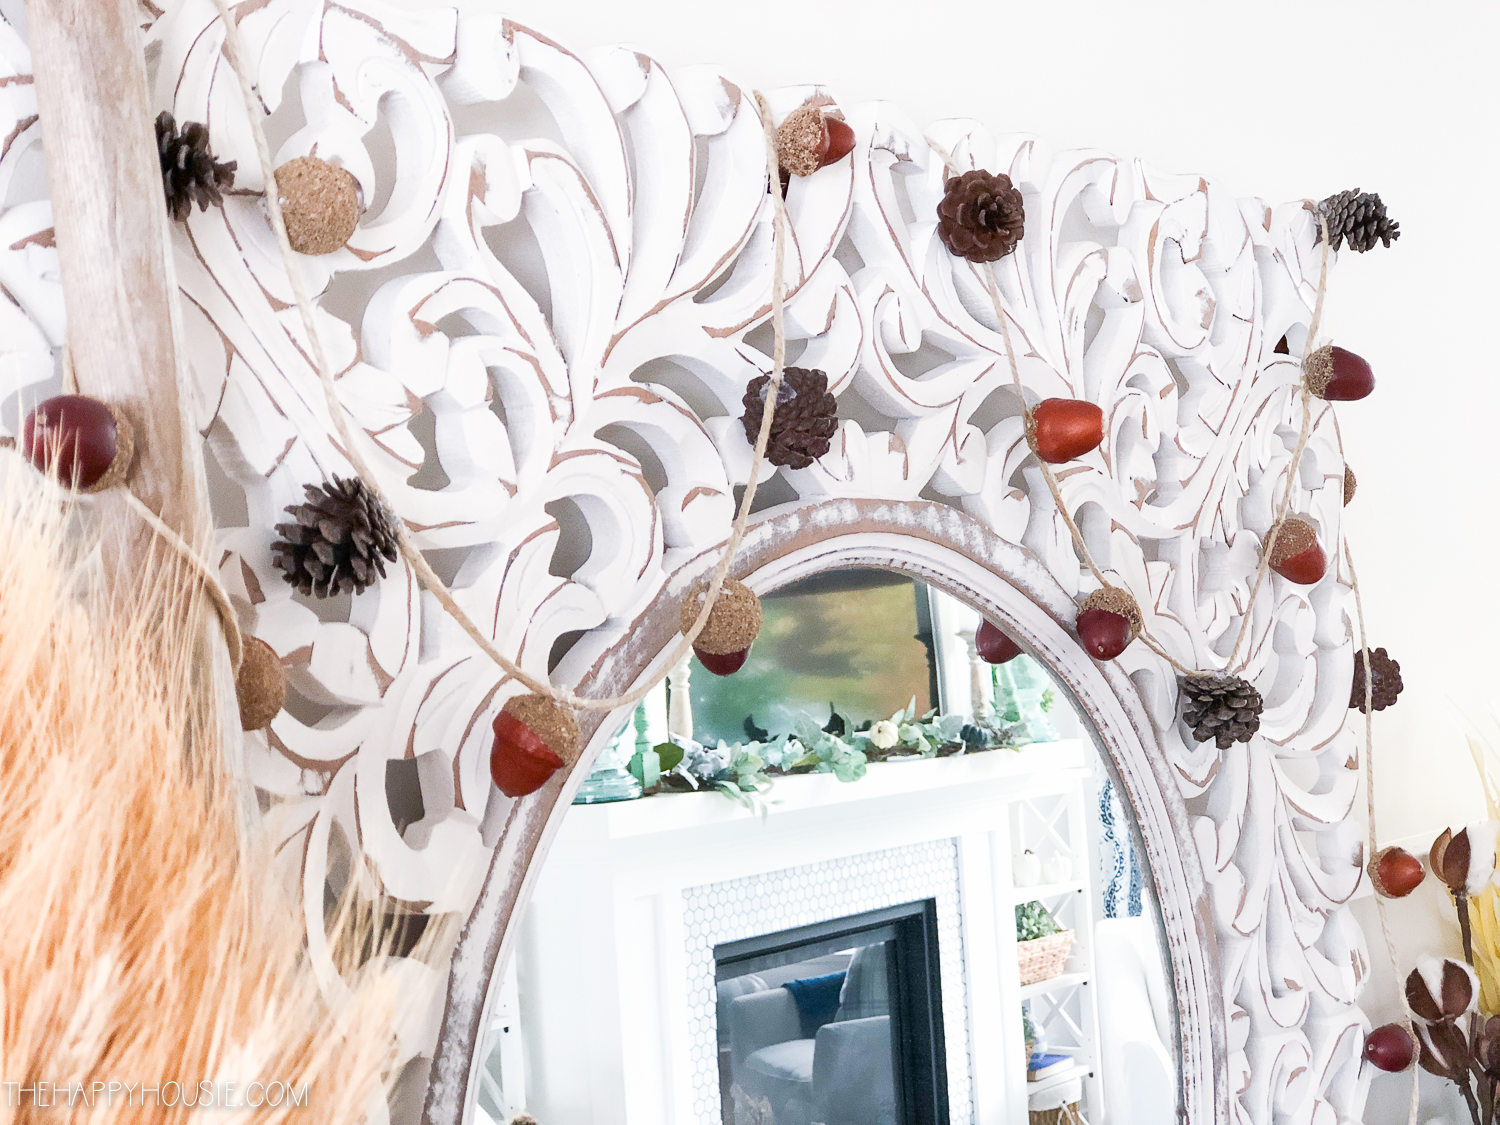 The strung up acorns and pinecones on the mirror.